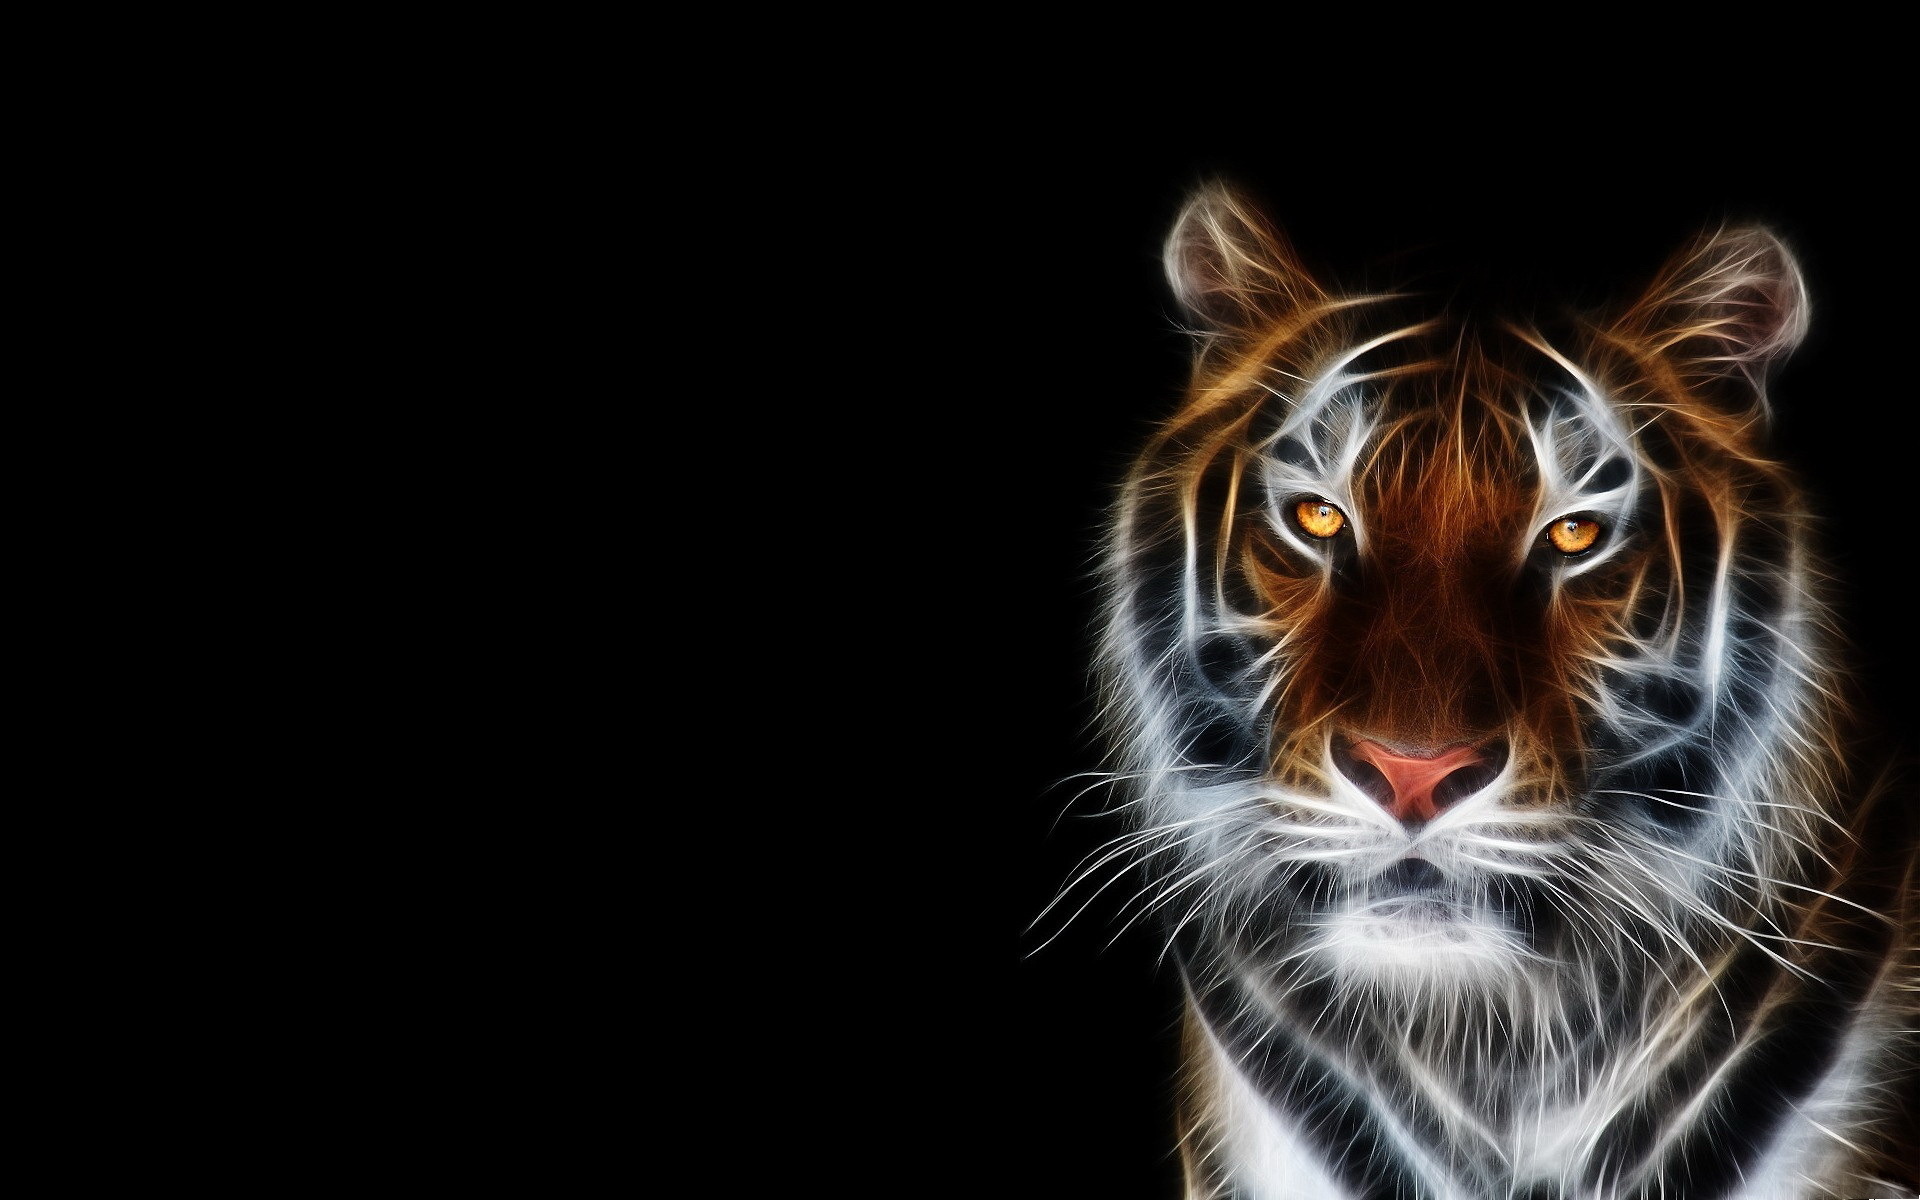 Wallpaper | 3D wallpapers | photo | picture | tiger, art, photoshop, the  dark background, 3d